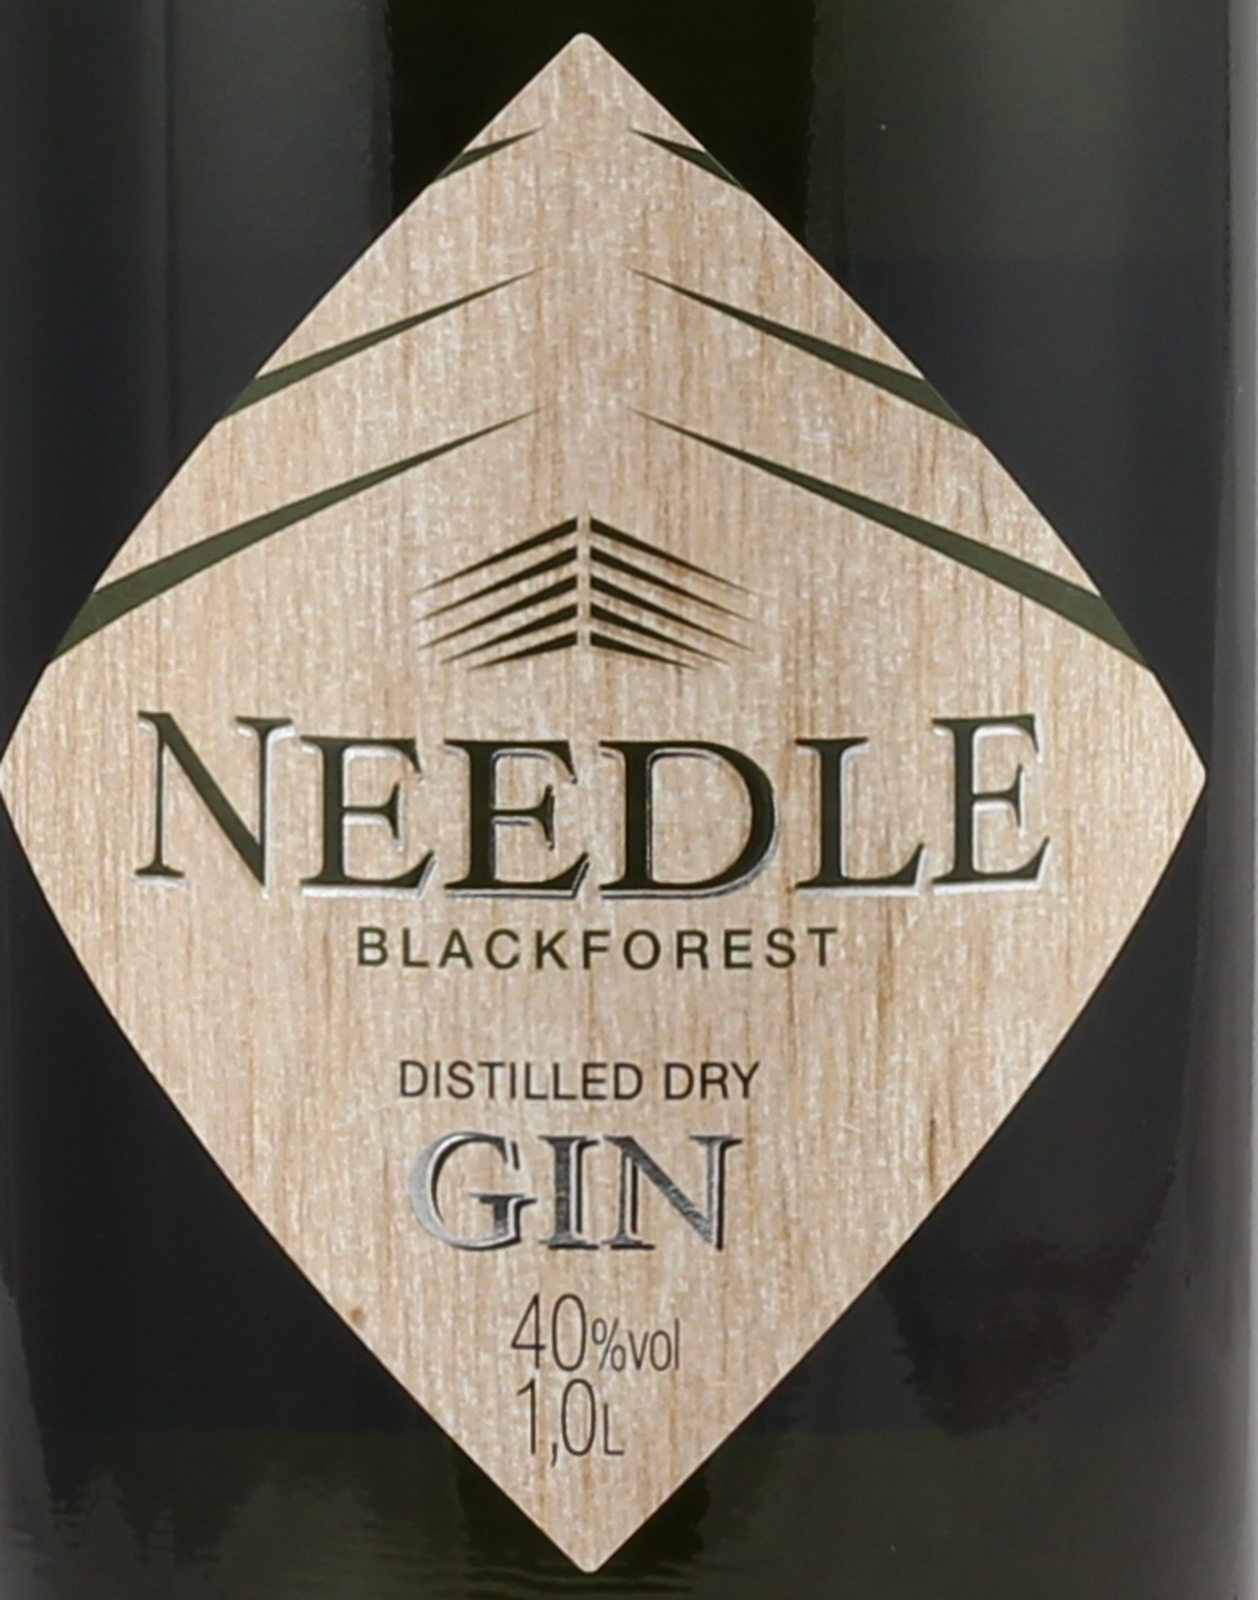 Needle Black Forest im Gin Onlineshop hier Dry